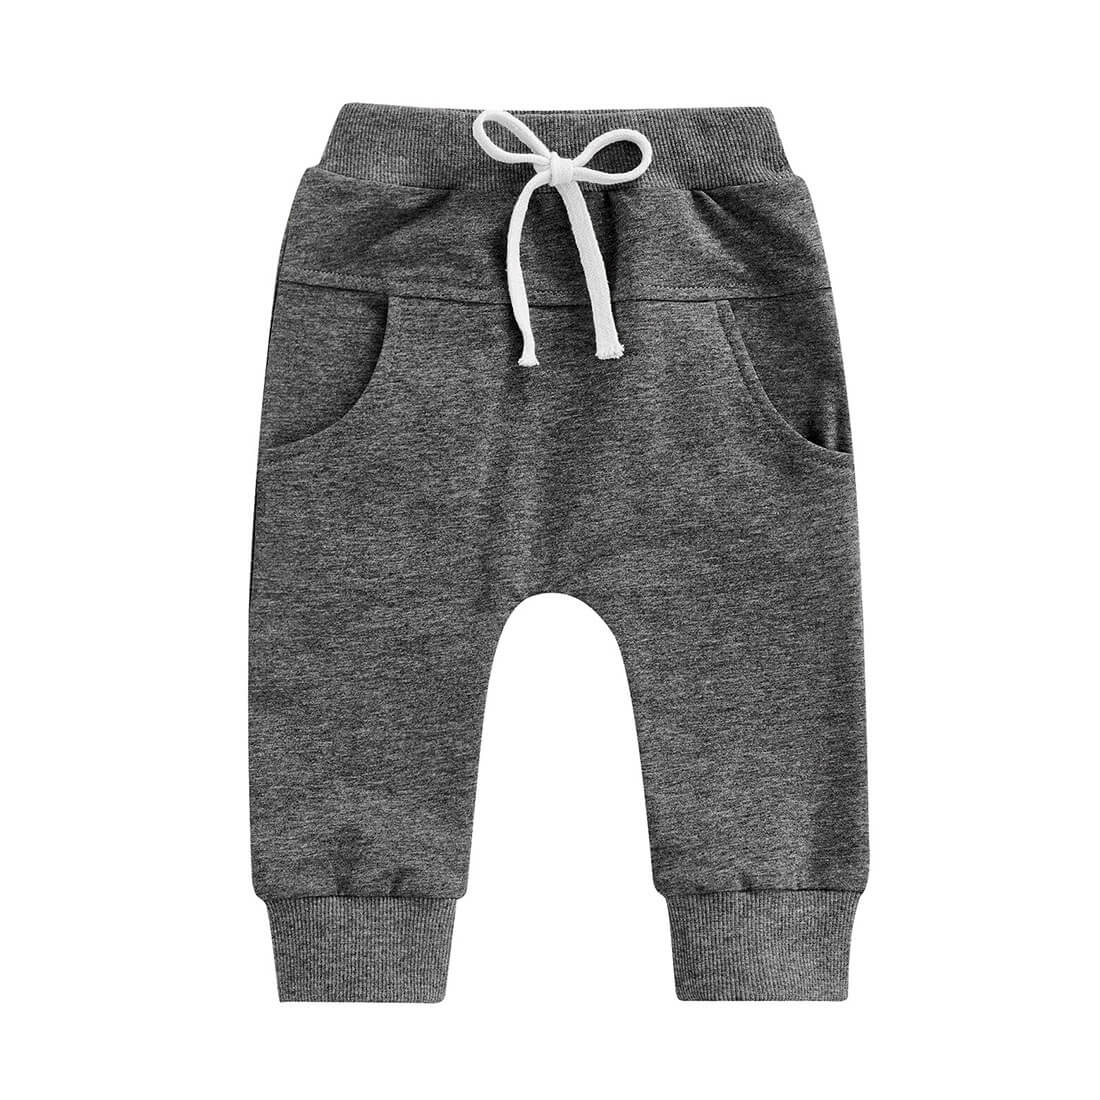 Gray Solid Baby Pants   